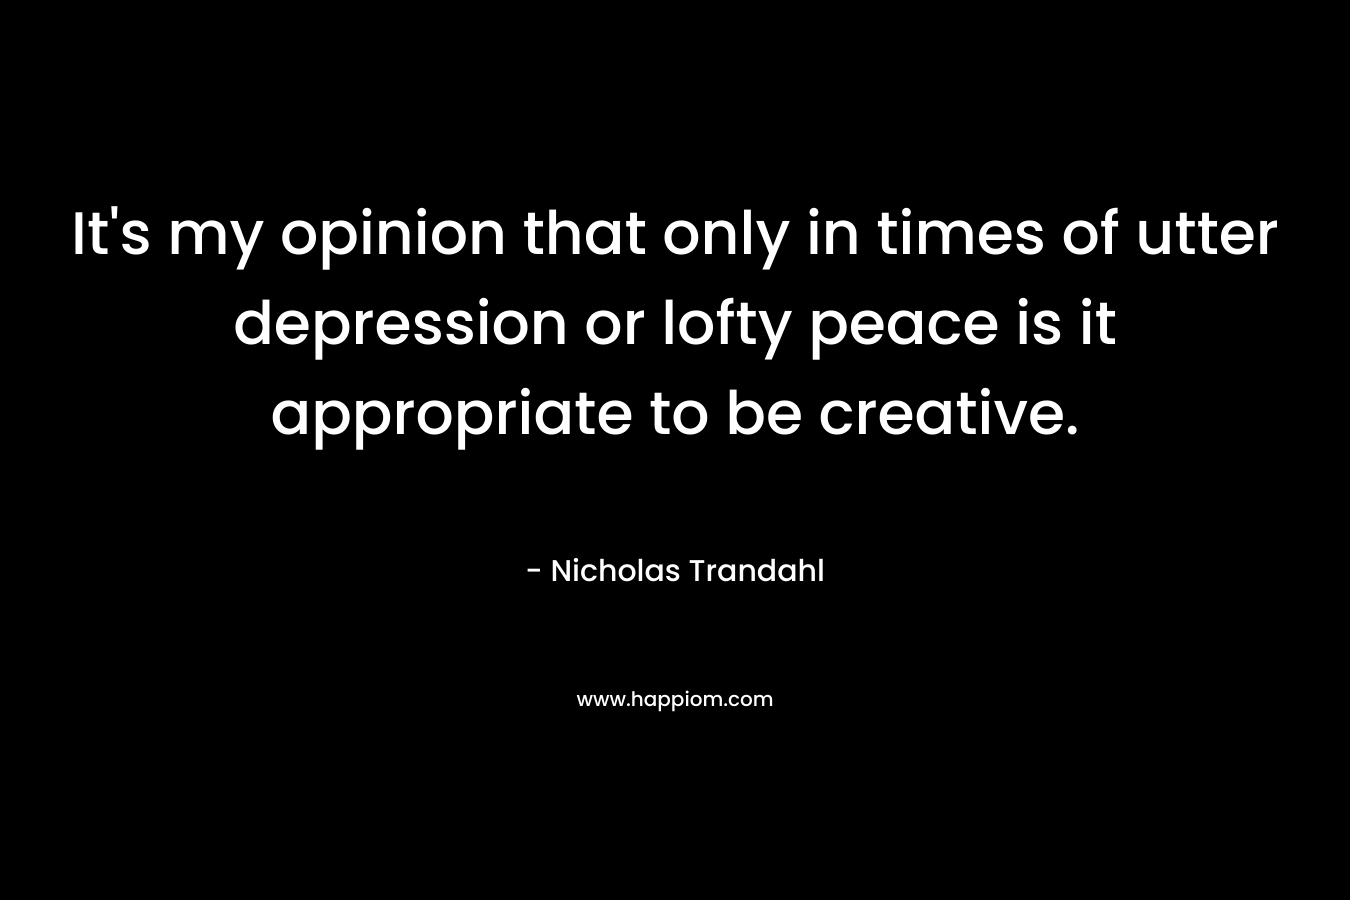 It's my opinion that only in times of utter depression or lofty peace is it appropriate to be creative.